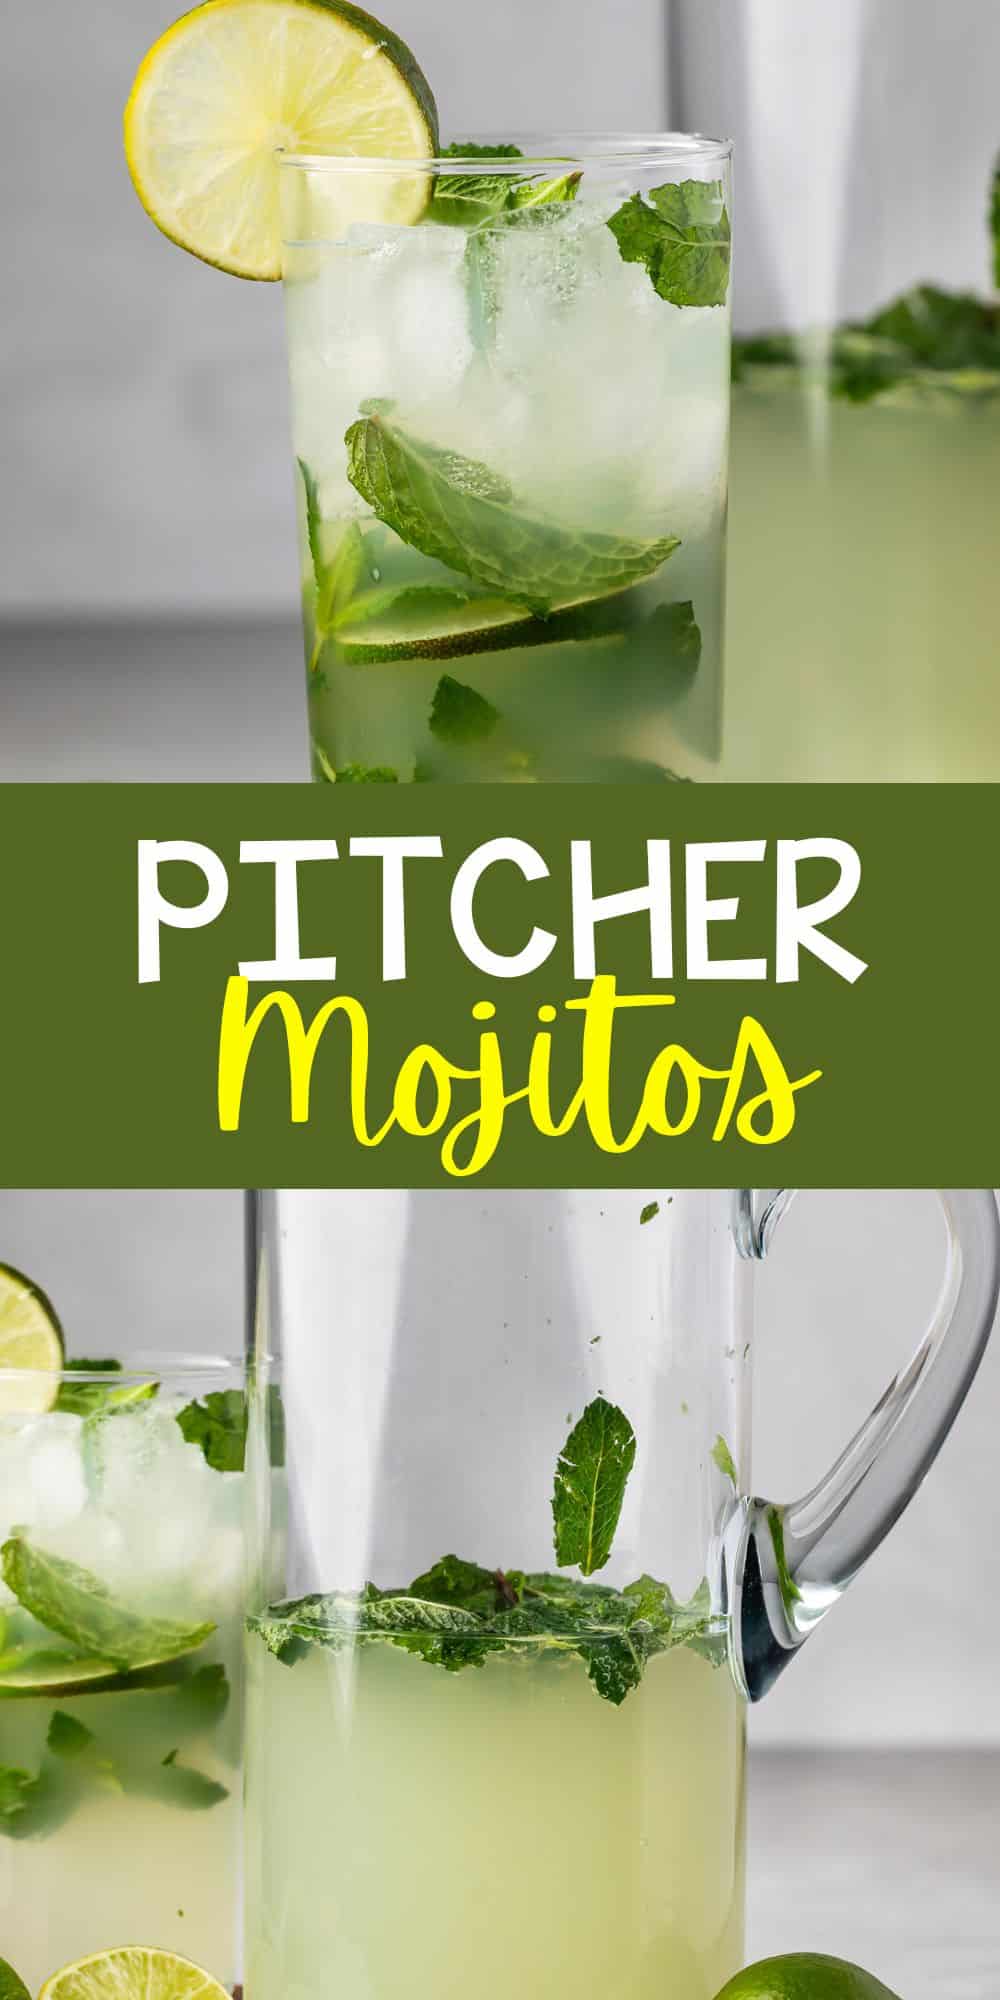 two photos of mojito in a tall clear glass with sliced limes in and around the glass with mint with words on the image.